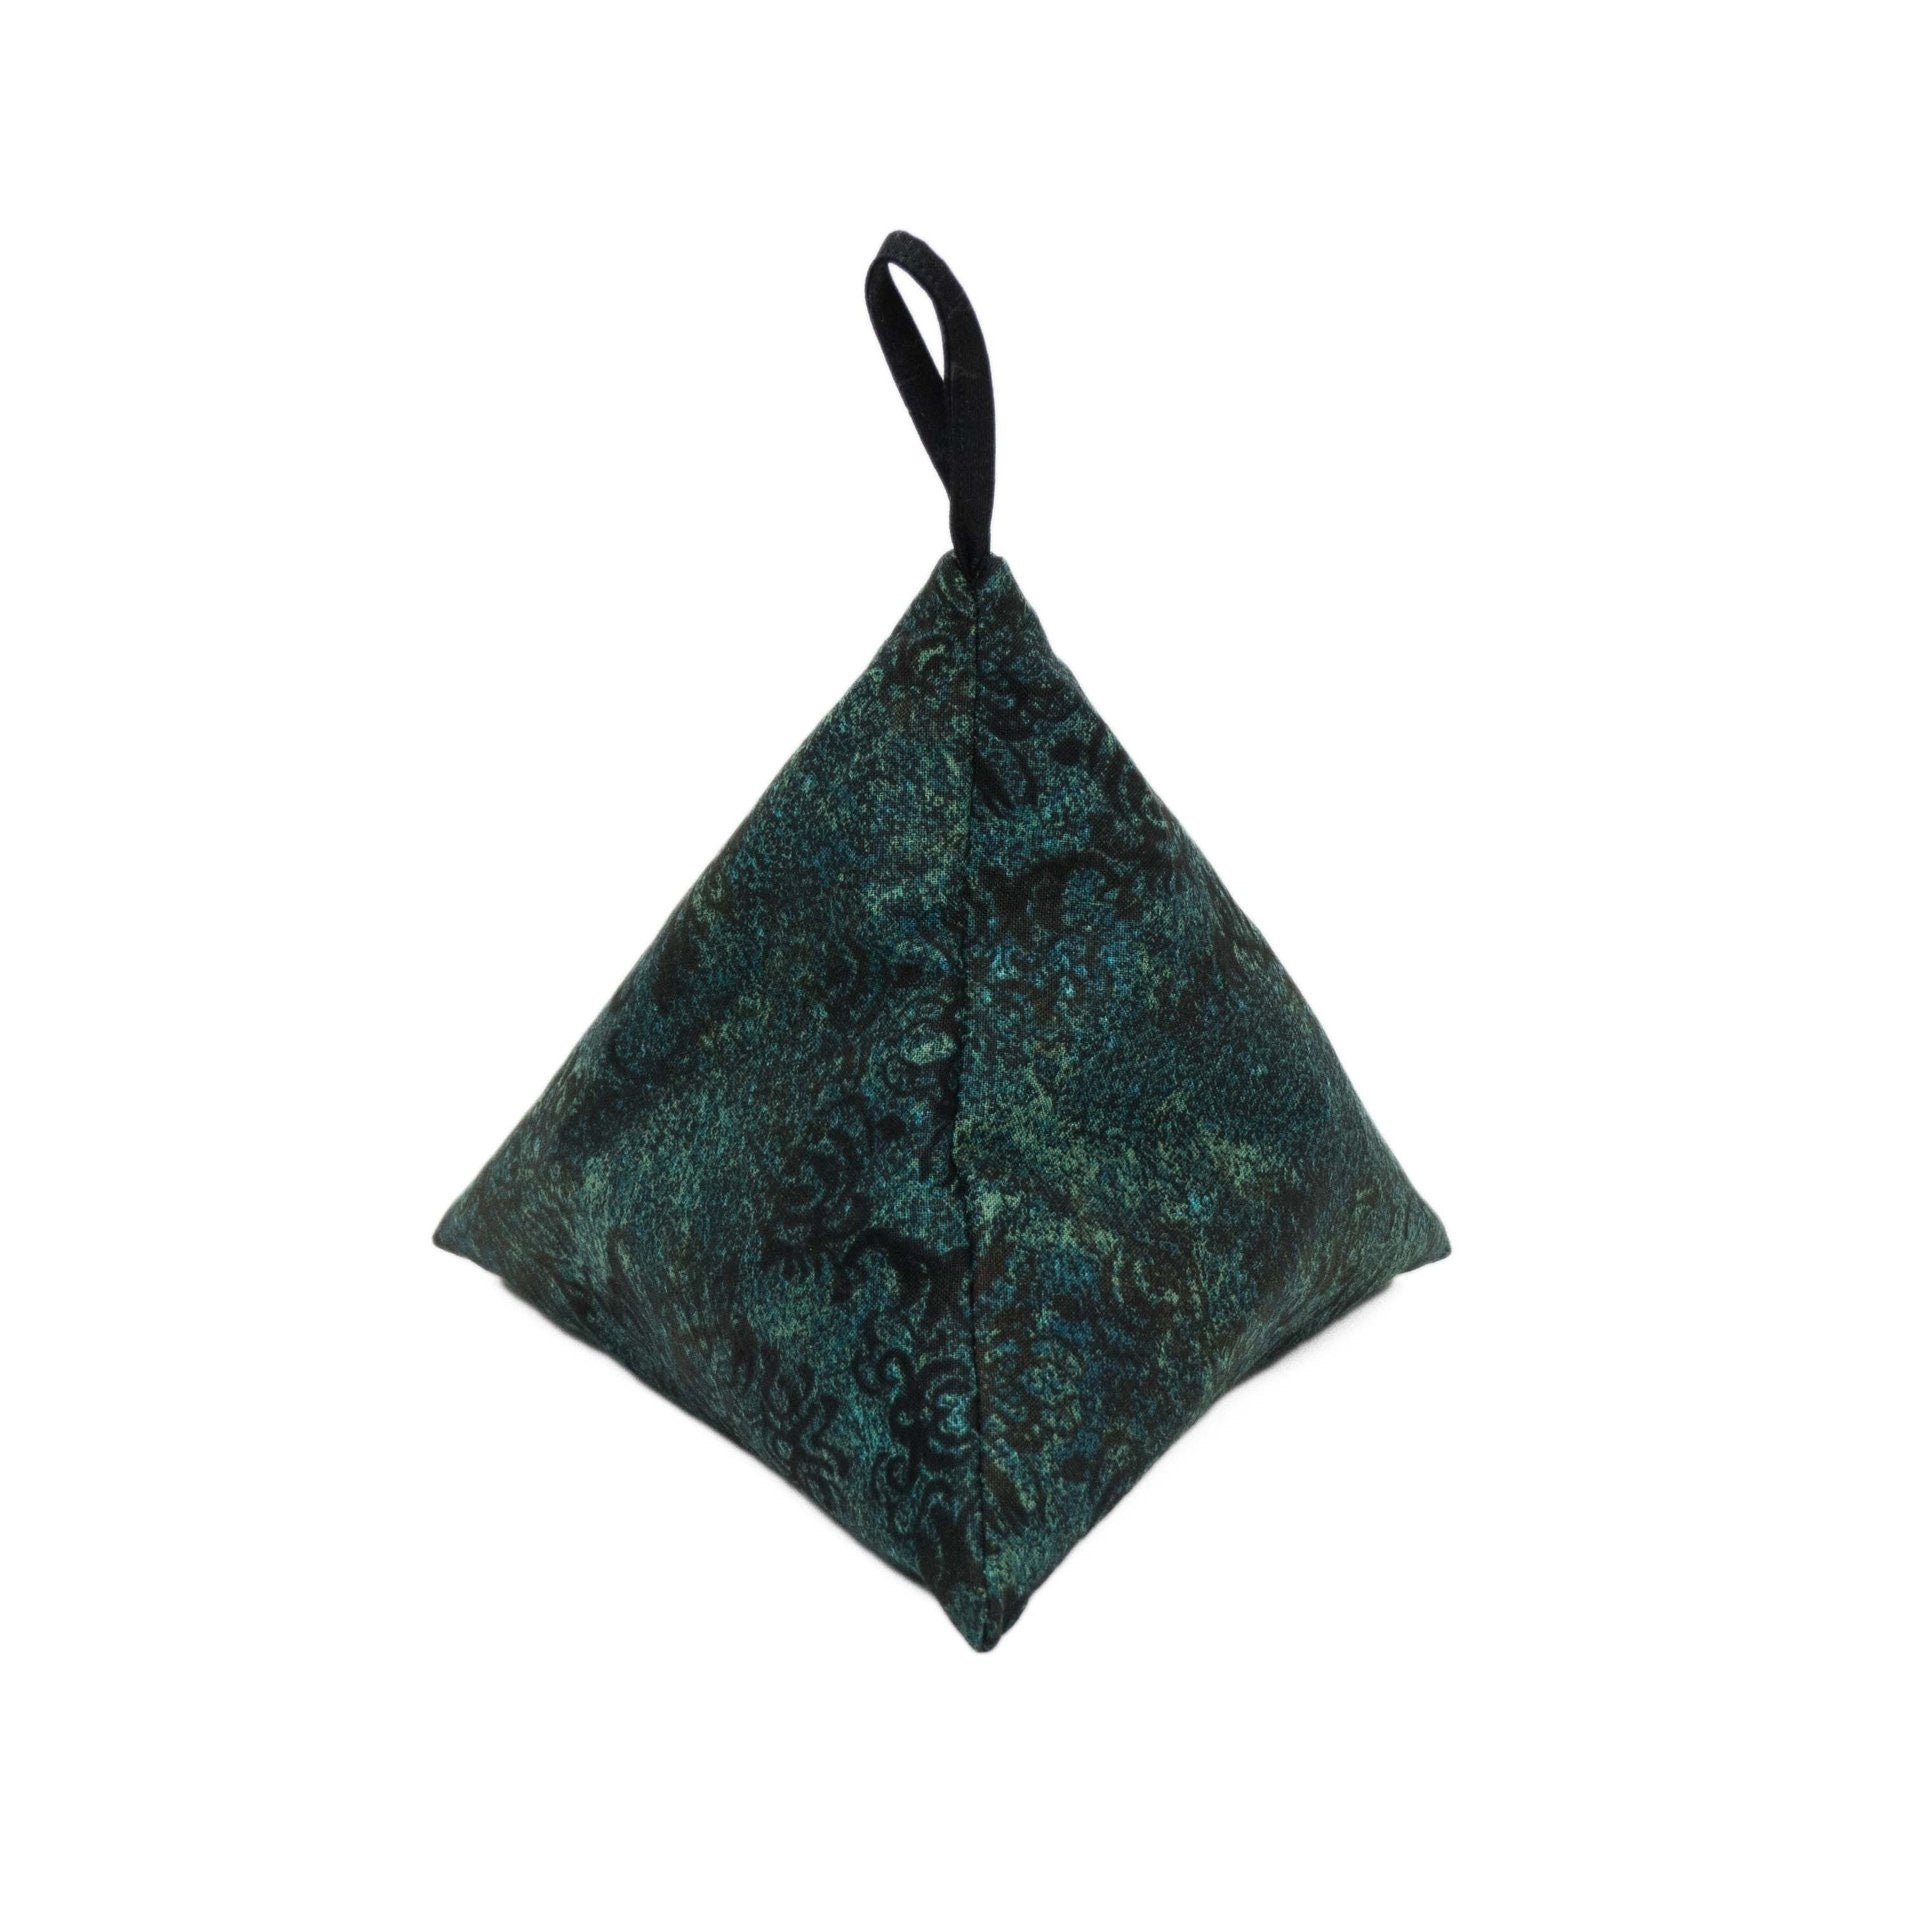 Dark Teal Damask - Llexical Notions Pouch - Knitting, Crochet, Spinning Accessory Bag